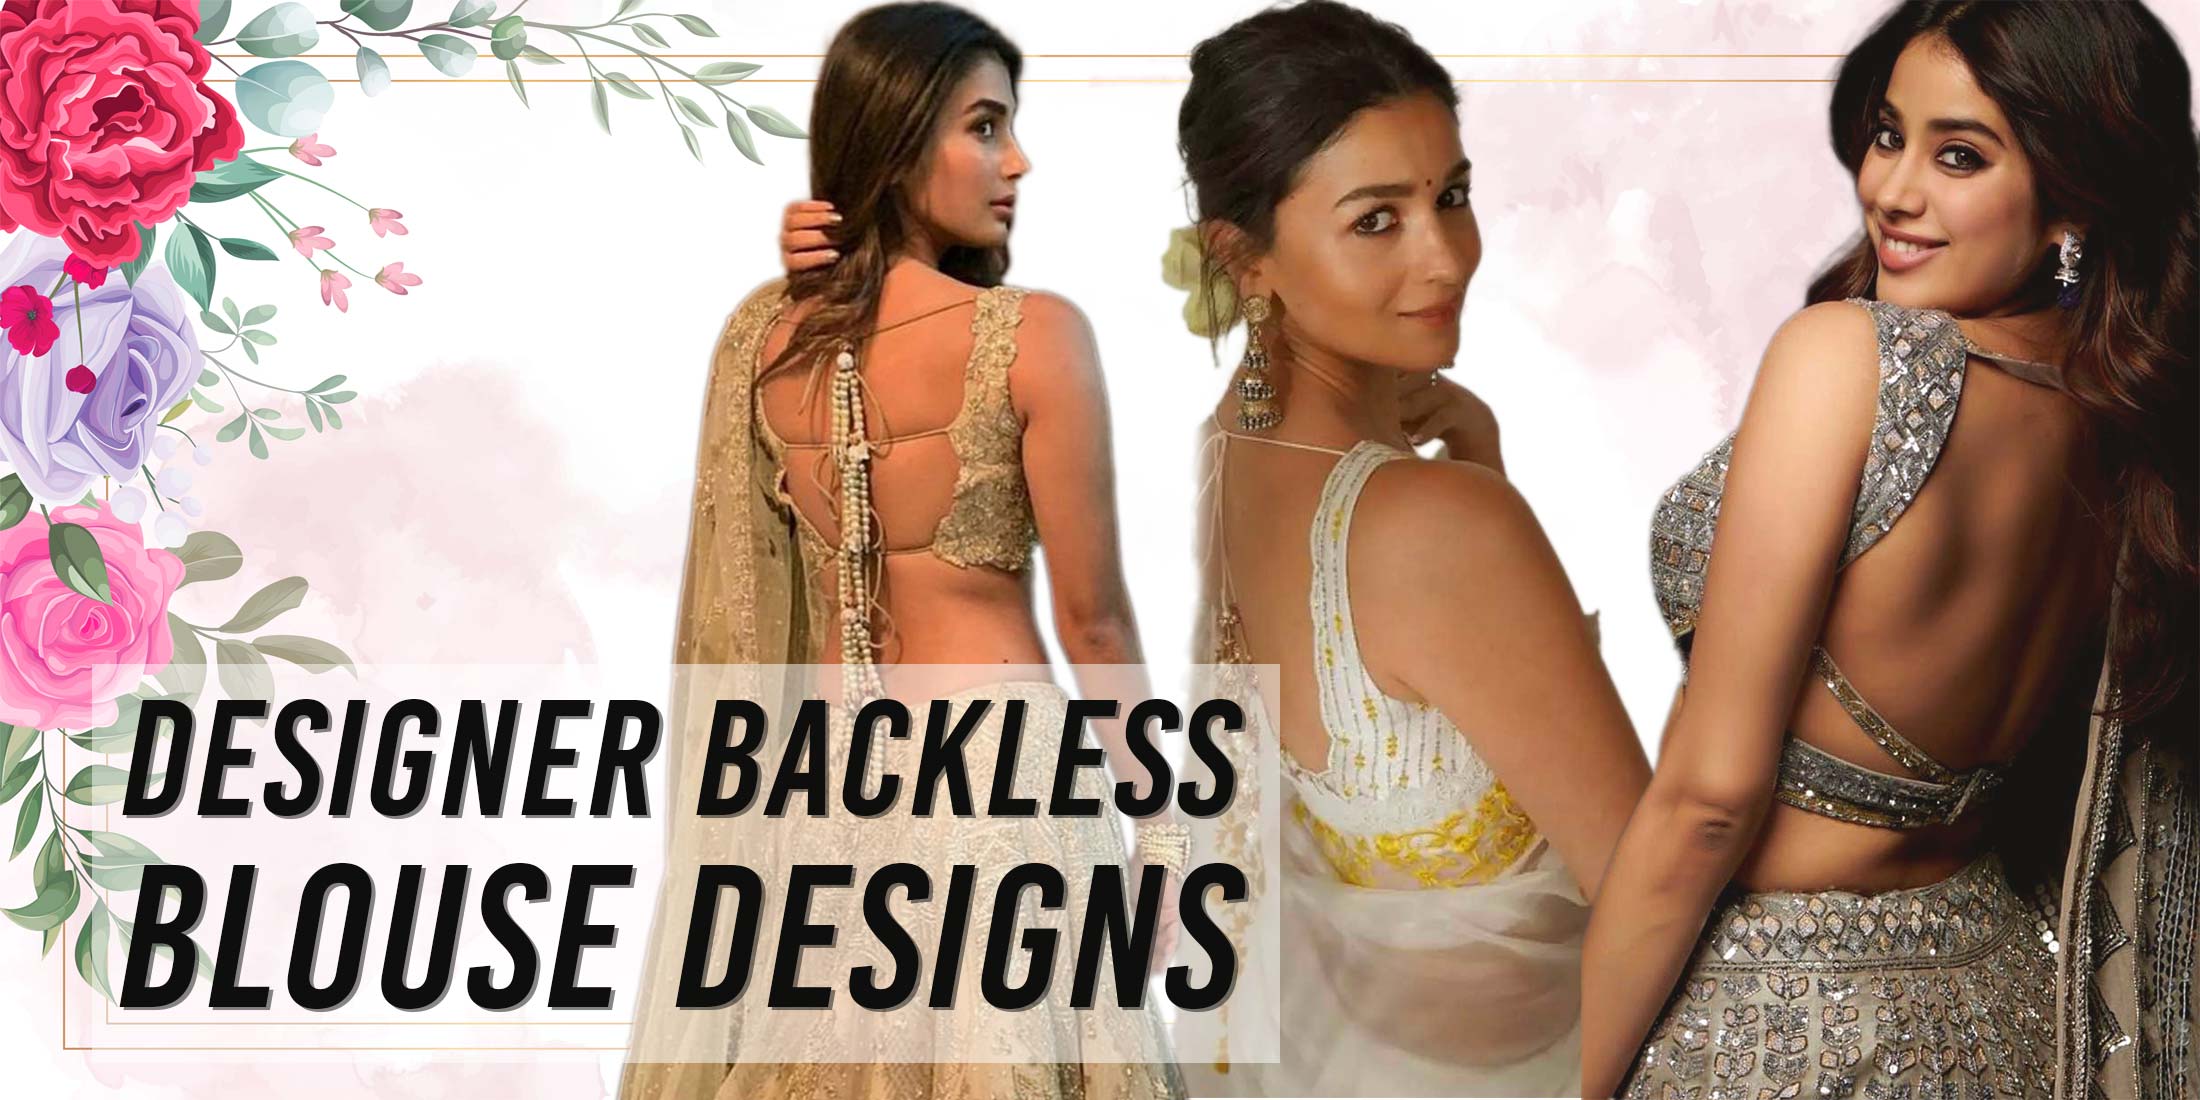 20+ Stunning Backless Blouse Designs for Fashion Divas in 2023